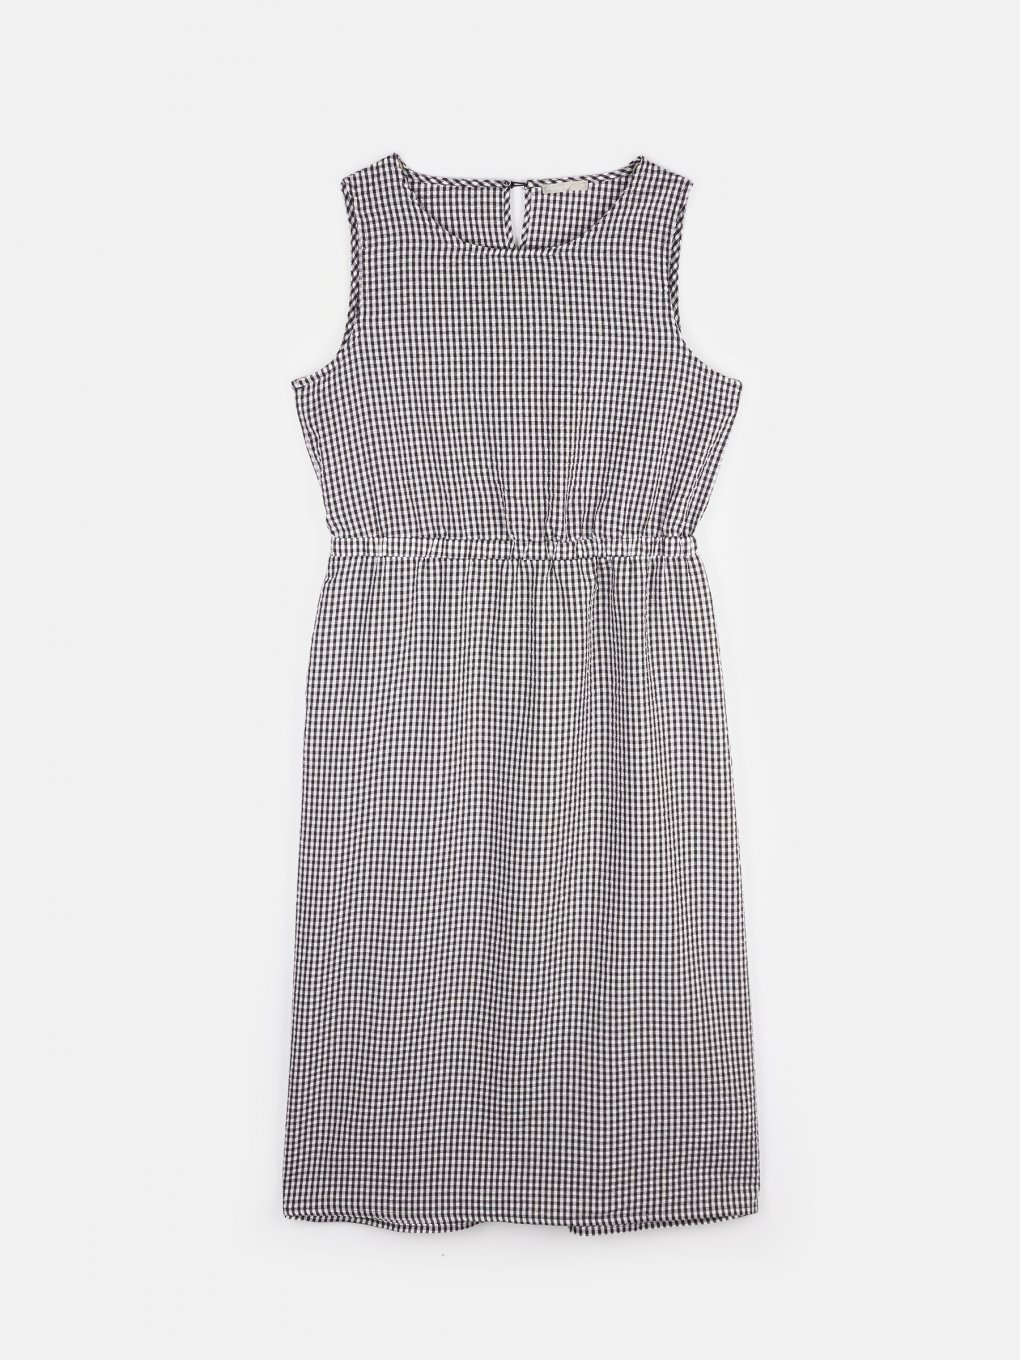 Plus size gingham dress with pockets